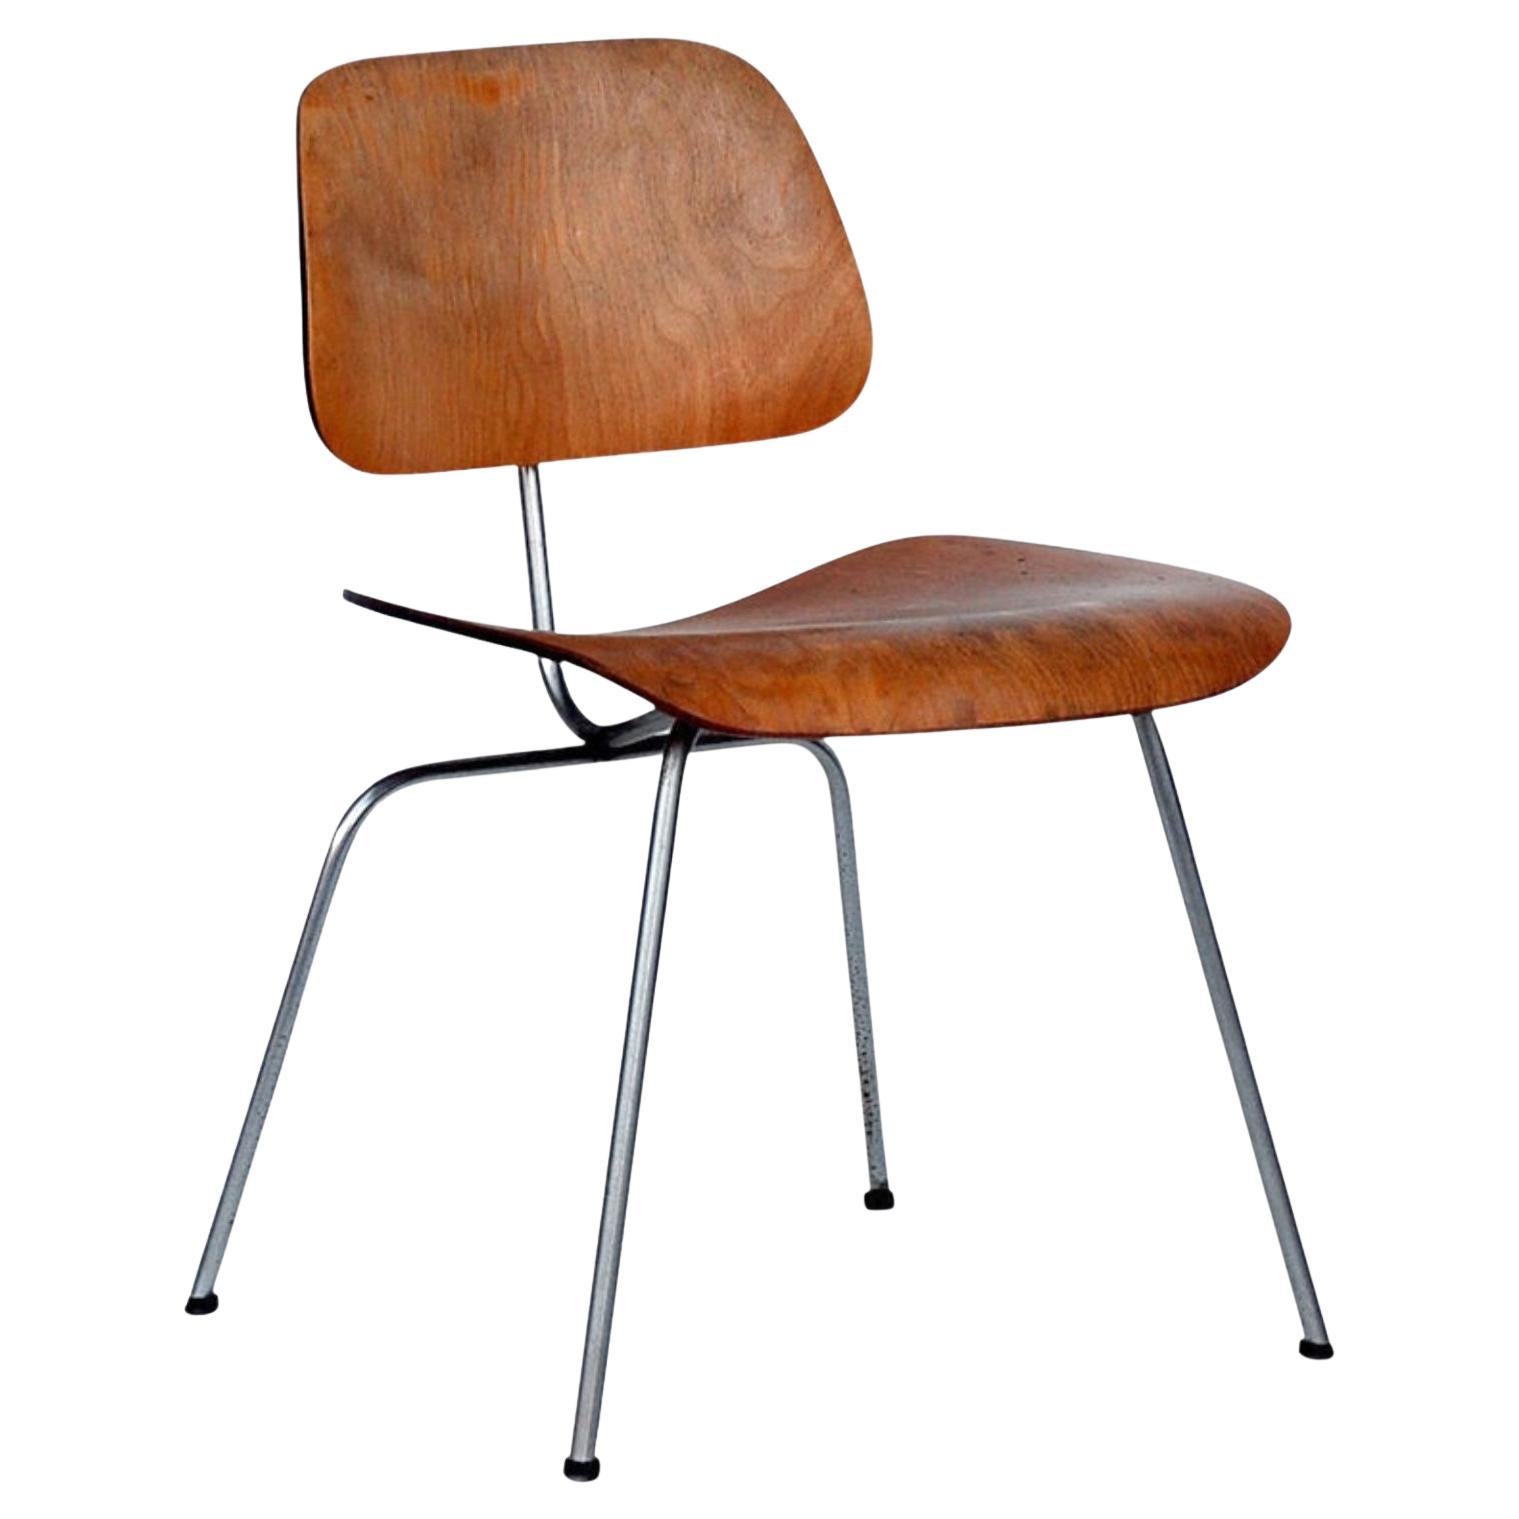 Collector's Early Eames DCM Chair For Sale